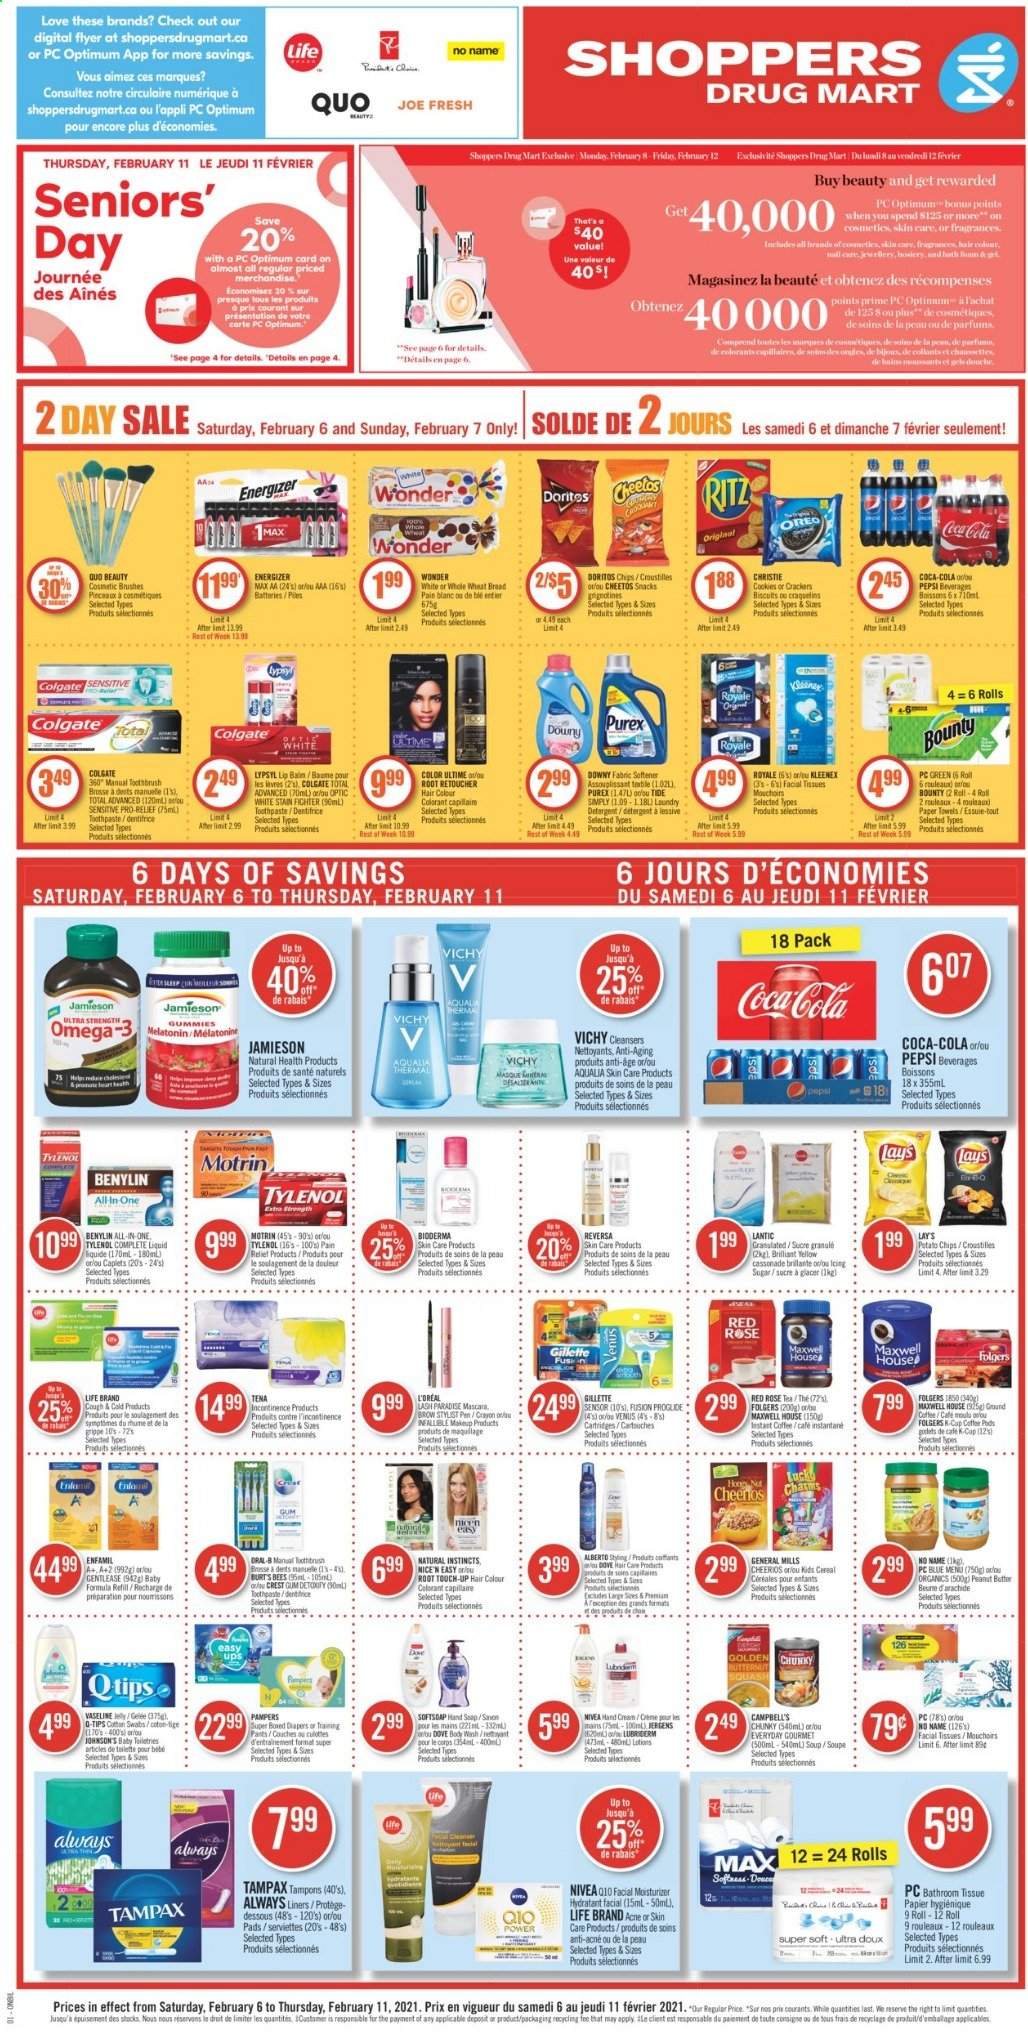 thumbnail - Shoppers Drug Mart Flyer - February 06, 2021 - February 11, 2021 - Sales products - cookies, snack, Bounty, jelly, crackers, biscuit, RITZ, Doritos, Cheetos, Lay’s, soup, cereals, Cheerios, Campbell's, peanut butter, Coca-Cola, Pepsi, Maxwell House, tea, instant coffee, Folgers, ground coffee, coffee capsules, K-Cups, Enfamil, pants, nappies, Johnson's, baby pants, bath tissue, Kleenex, Always liners, kitchen towels, paper towels, Tide, laundry detergent, Purex, Softsoap, Vichy, Vaseline, toothbrush, toothpaste, Crest, tampons, facial tissues, L’Oréal, moisturizer, Root Touch-Up, hair color, Lubriderm, hand cream, Jergens, Venus, makeup, pain relief, Melatonin, Tylenol, Omega-3, Benylin, Motrin, Oreo, Gillette, mascara, Tampax, Pampers, Nivea, Oral-B, chips. Page 1.